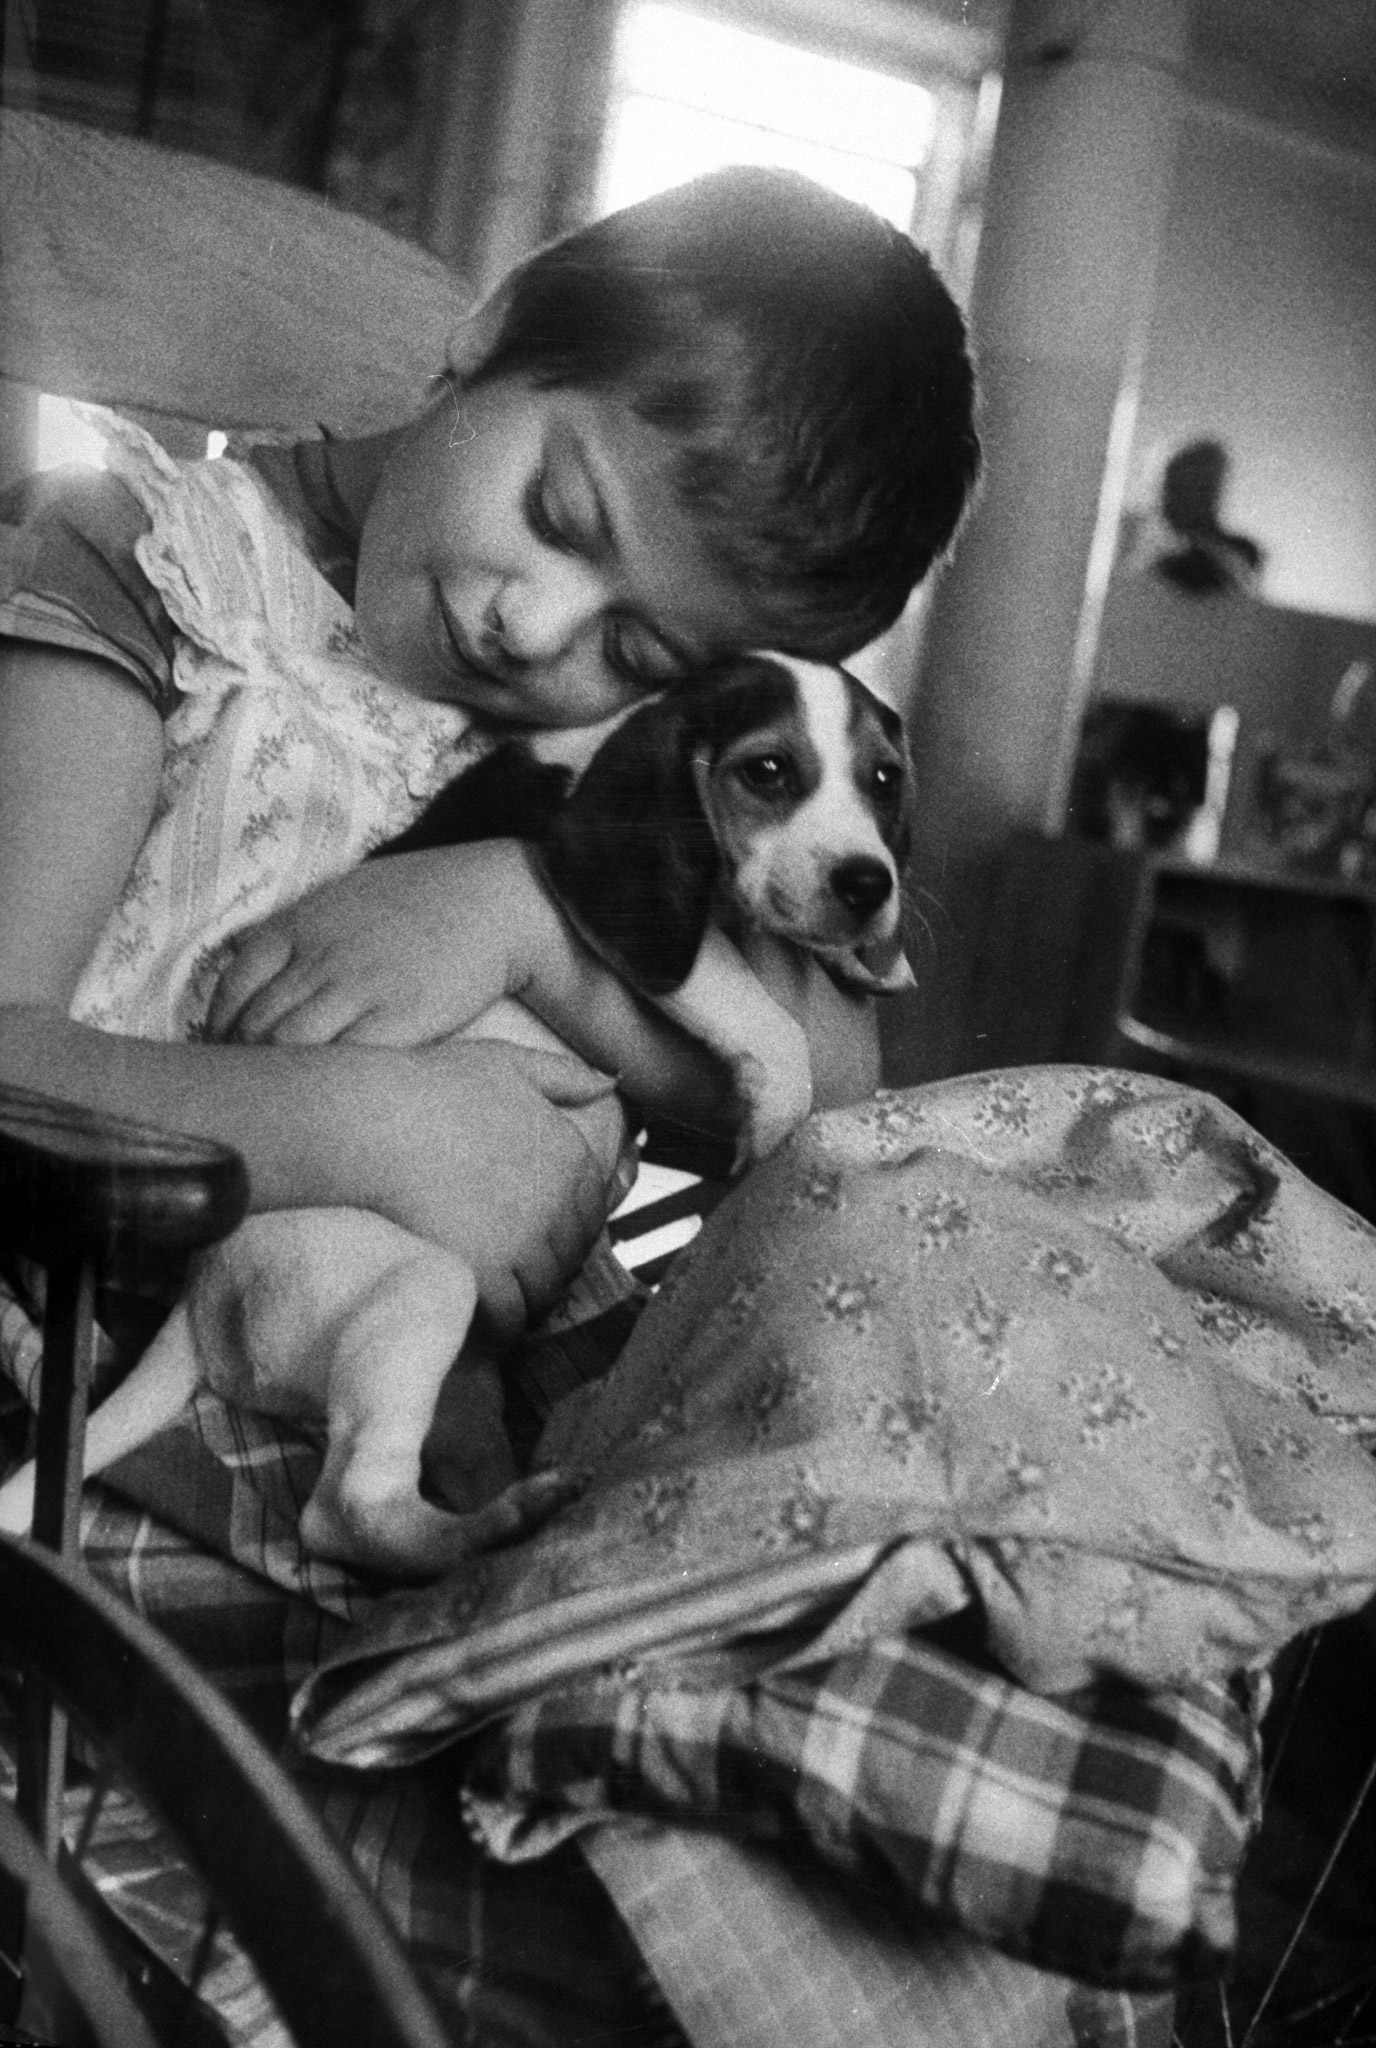 A child cuddling with a puppy as one of the hospital's methods of using therapy through animals, 1956.